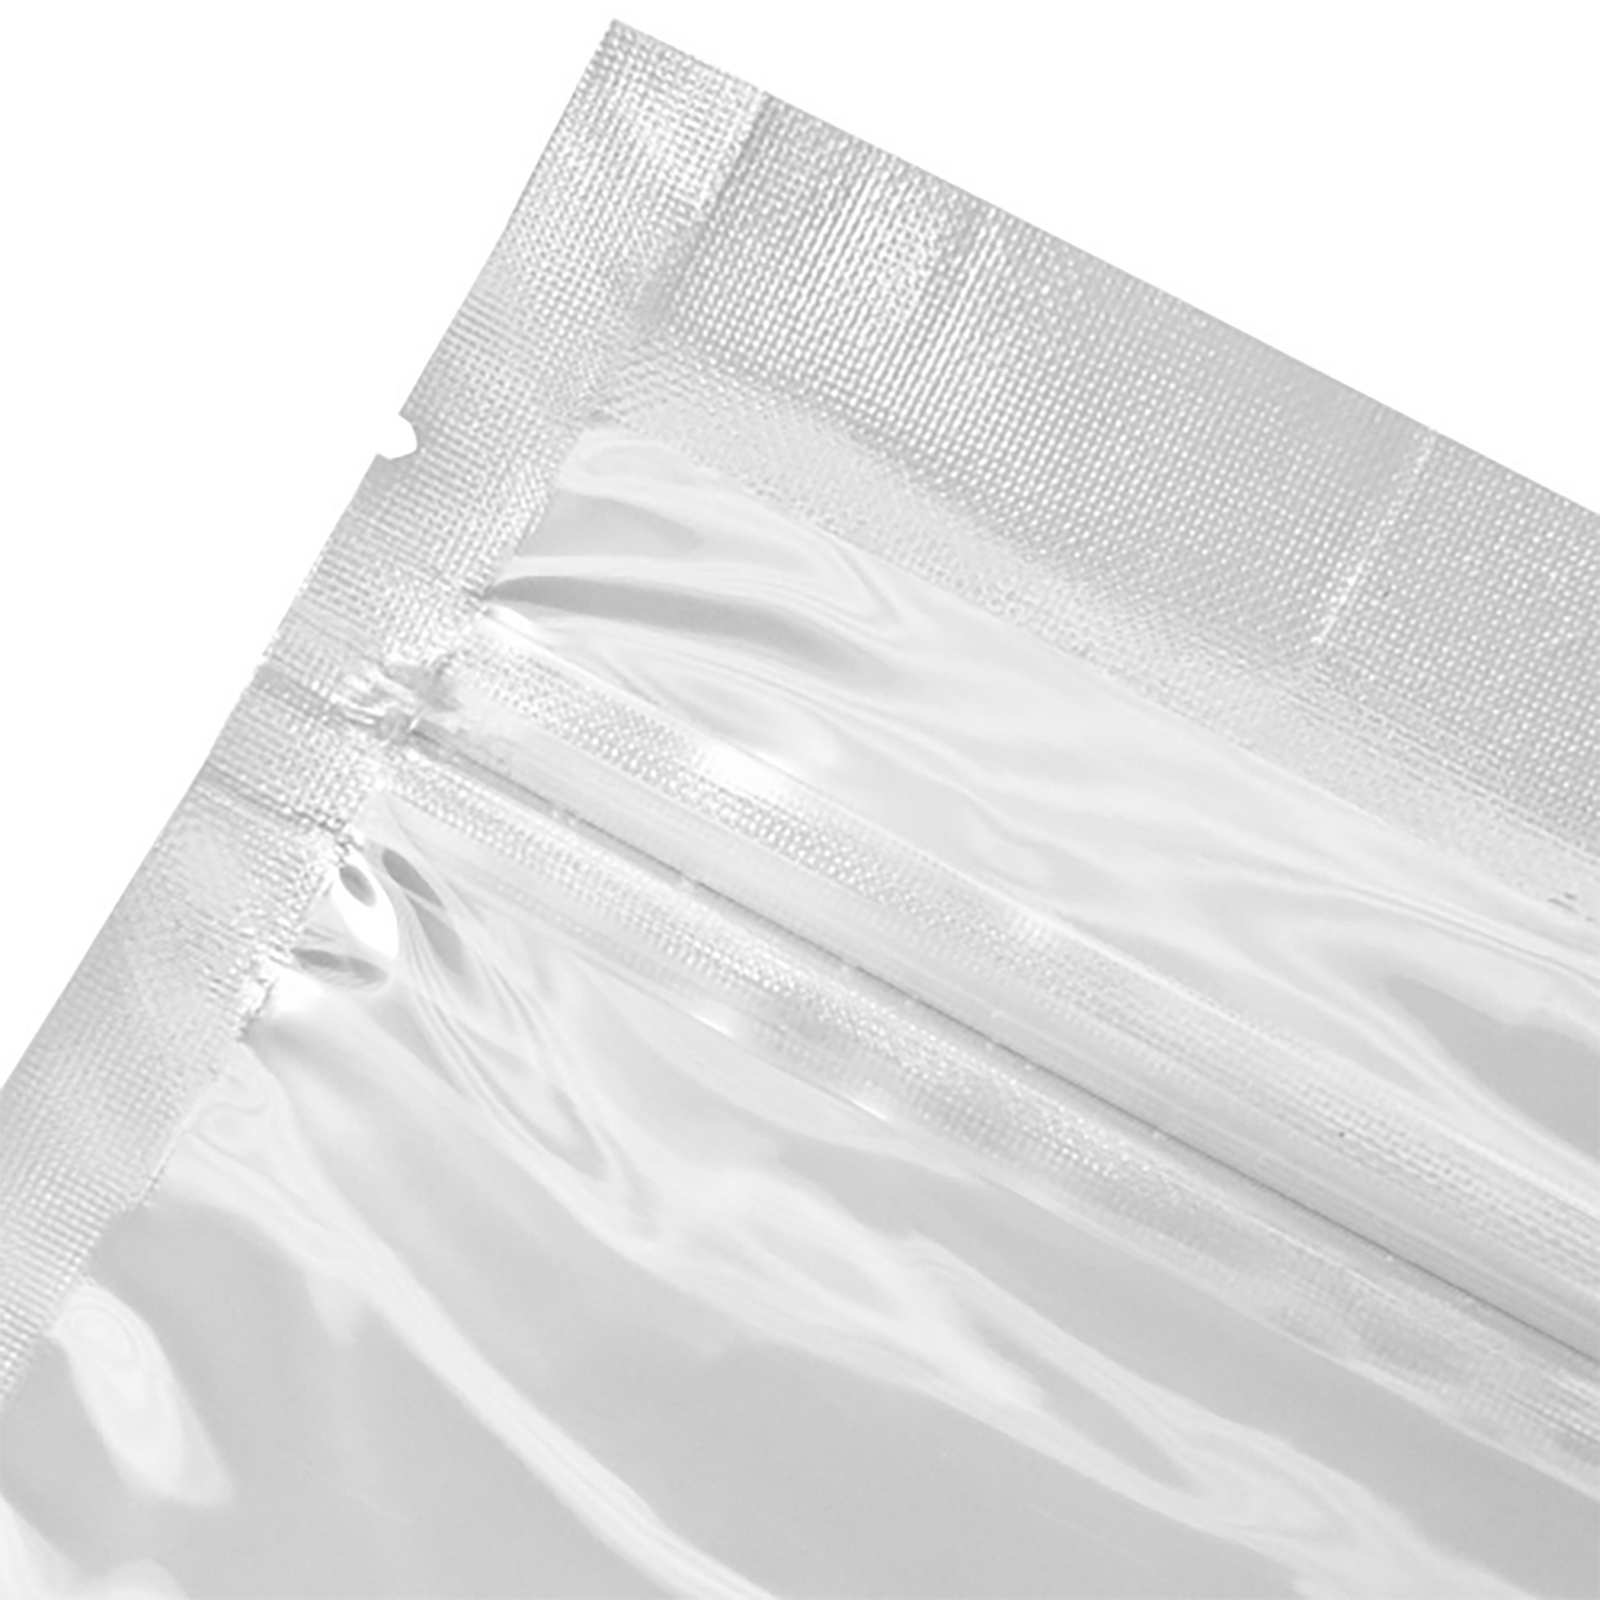 Close up of a JORESTECH® vacuum sealer bag with zipper over white background